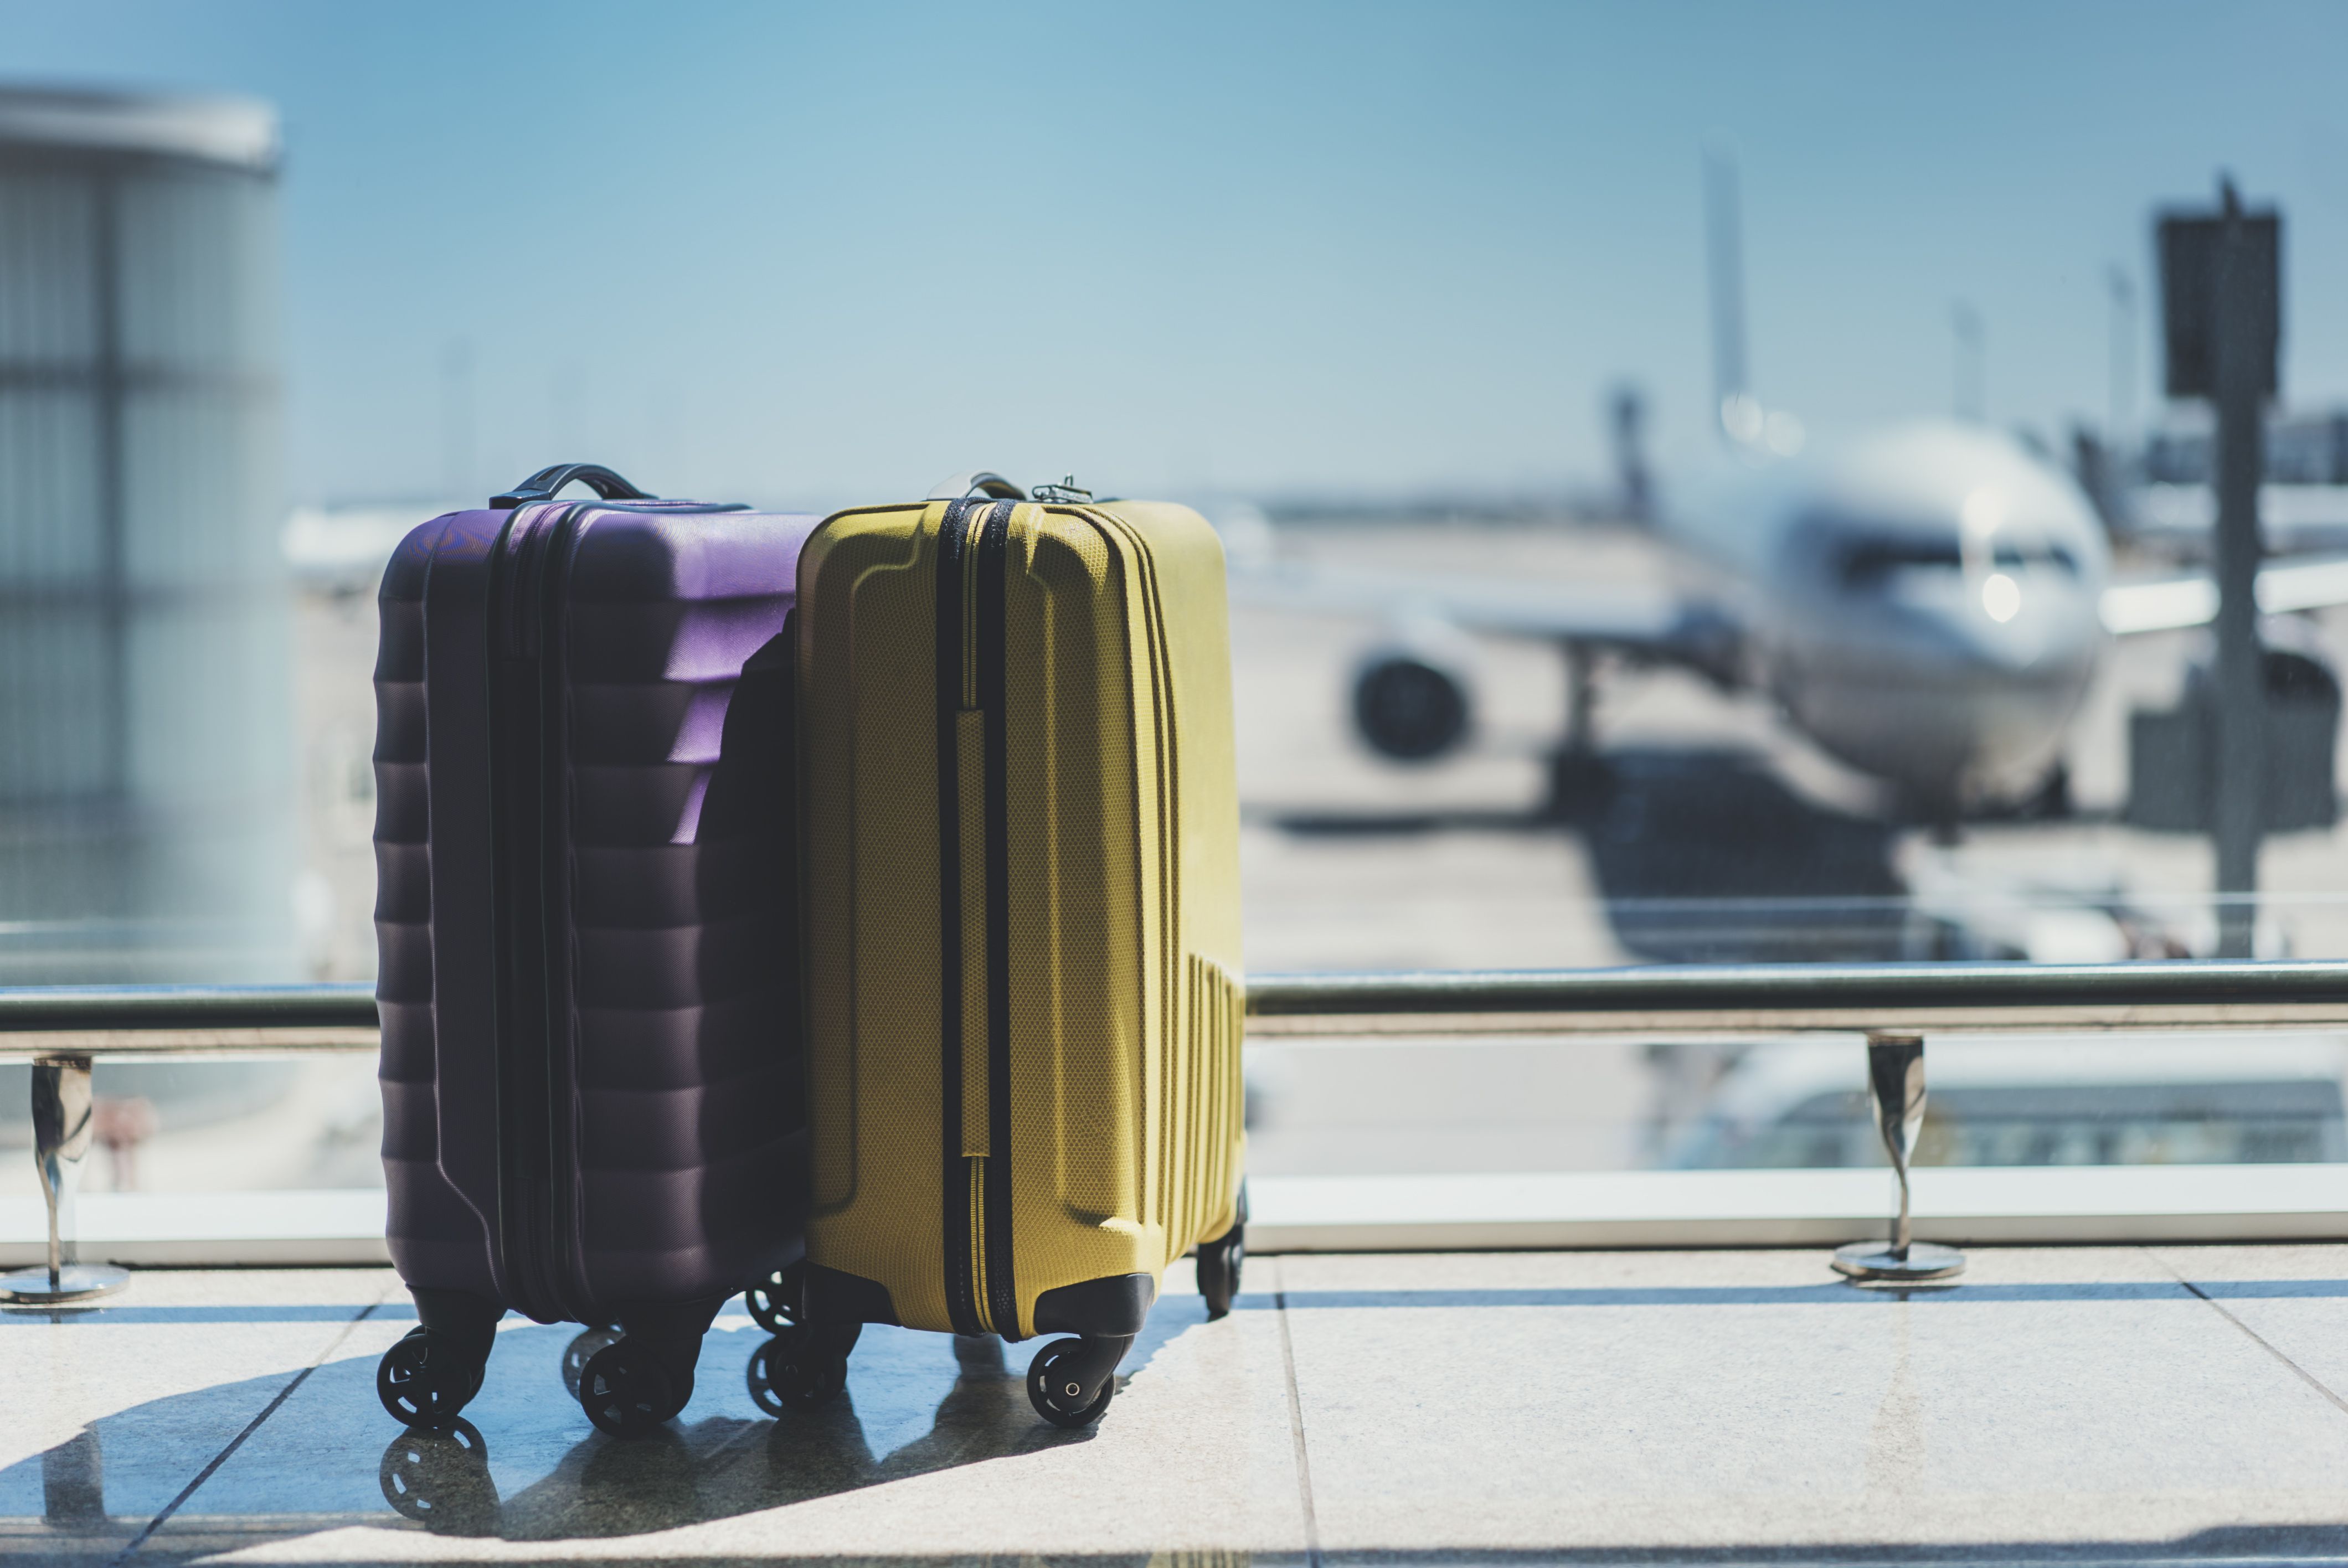 Luggage and Aircraft in Background Shutterstock